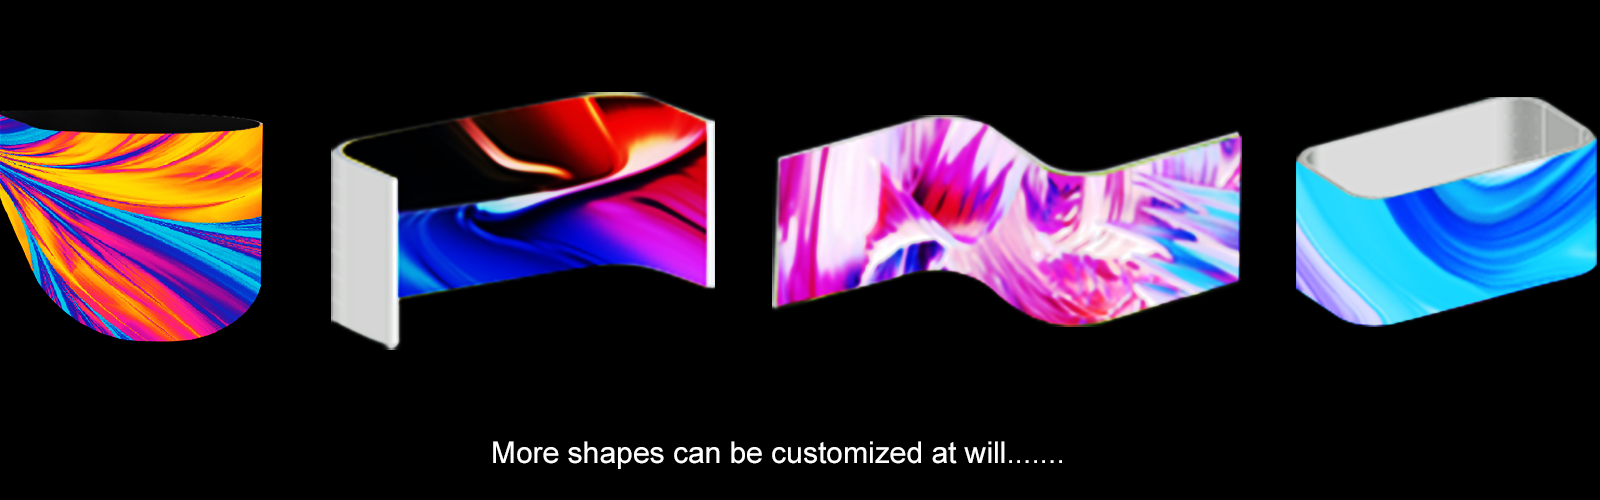 MPLED curved flexible led display wall screen